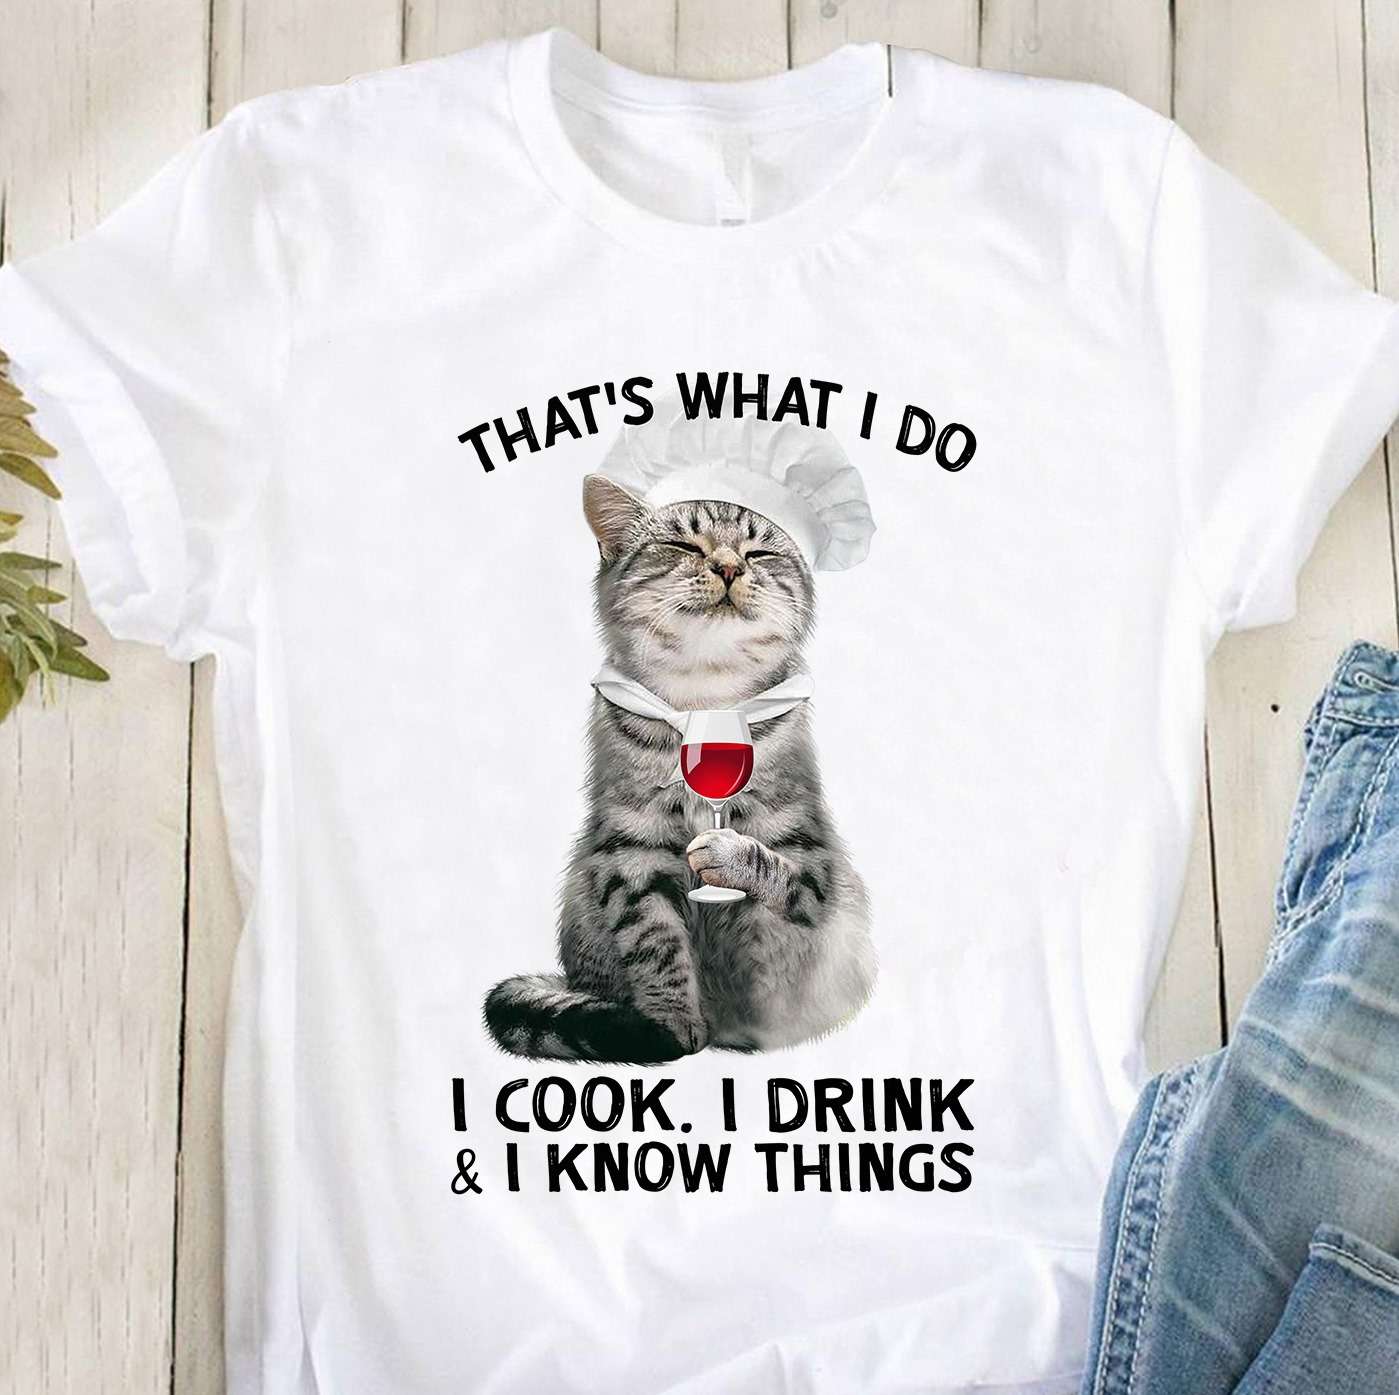 Chef Cat Love Wine - That's what i do i cook i drink and i know things